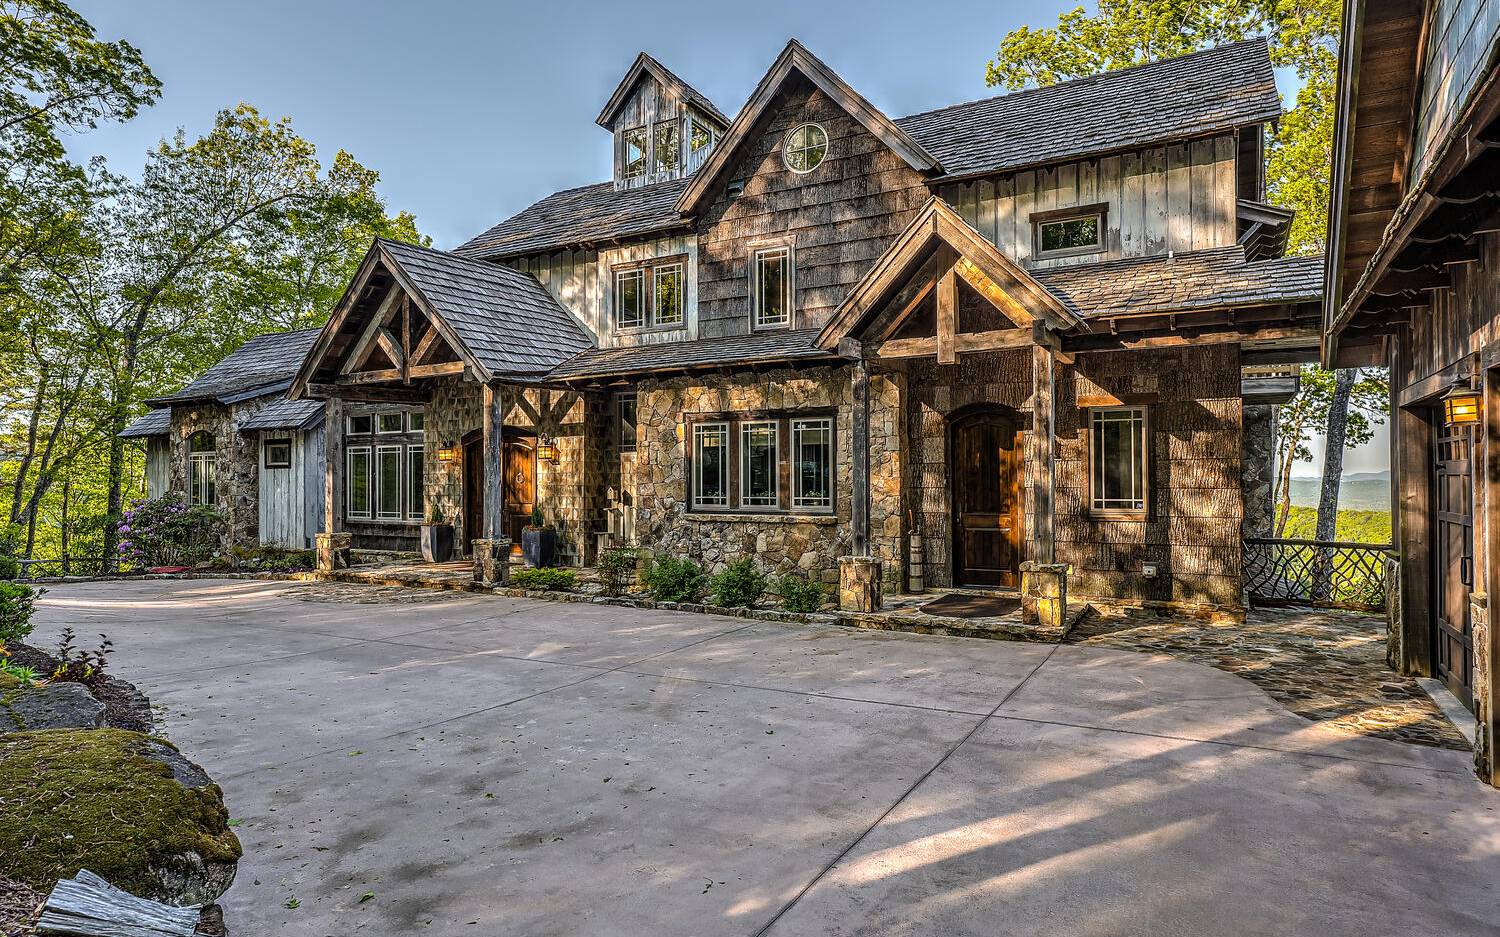 THIS ONE OF A KIND RUSTIC home on private 2.14 acre lot w/magnificent layered MOUNTAIN VIEWS is extraordinary in every detail & design w/natural elements sourced carefully & painstakingly to make it unique. This open floor plan boasts timber frame accents, Tennessee fieldstone fireplace, wide-plank wood flooring & wall of windows w/25' cathedral ceiling to capture the VIEW. Owners suite on main level complete w/TWO full separate owner's baths, custom tiled, walk-in closets and fireplace; gourmet kitchen w/custom cabinetry and high-end appliances, butlers pantry & laundry on main level, screened in porch w/outdoor fireplace and dining area, upper level w/two bedrooms each w/private bath, separate study/library, finished terrace level w/two guest suites, recreation room, sauna, ELEVATOR for access to each level & ADA compliant bathroom on second floor, detached 3 car garage, whole house generator, multiple storage rooms,